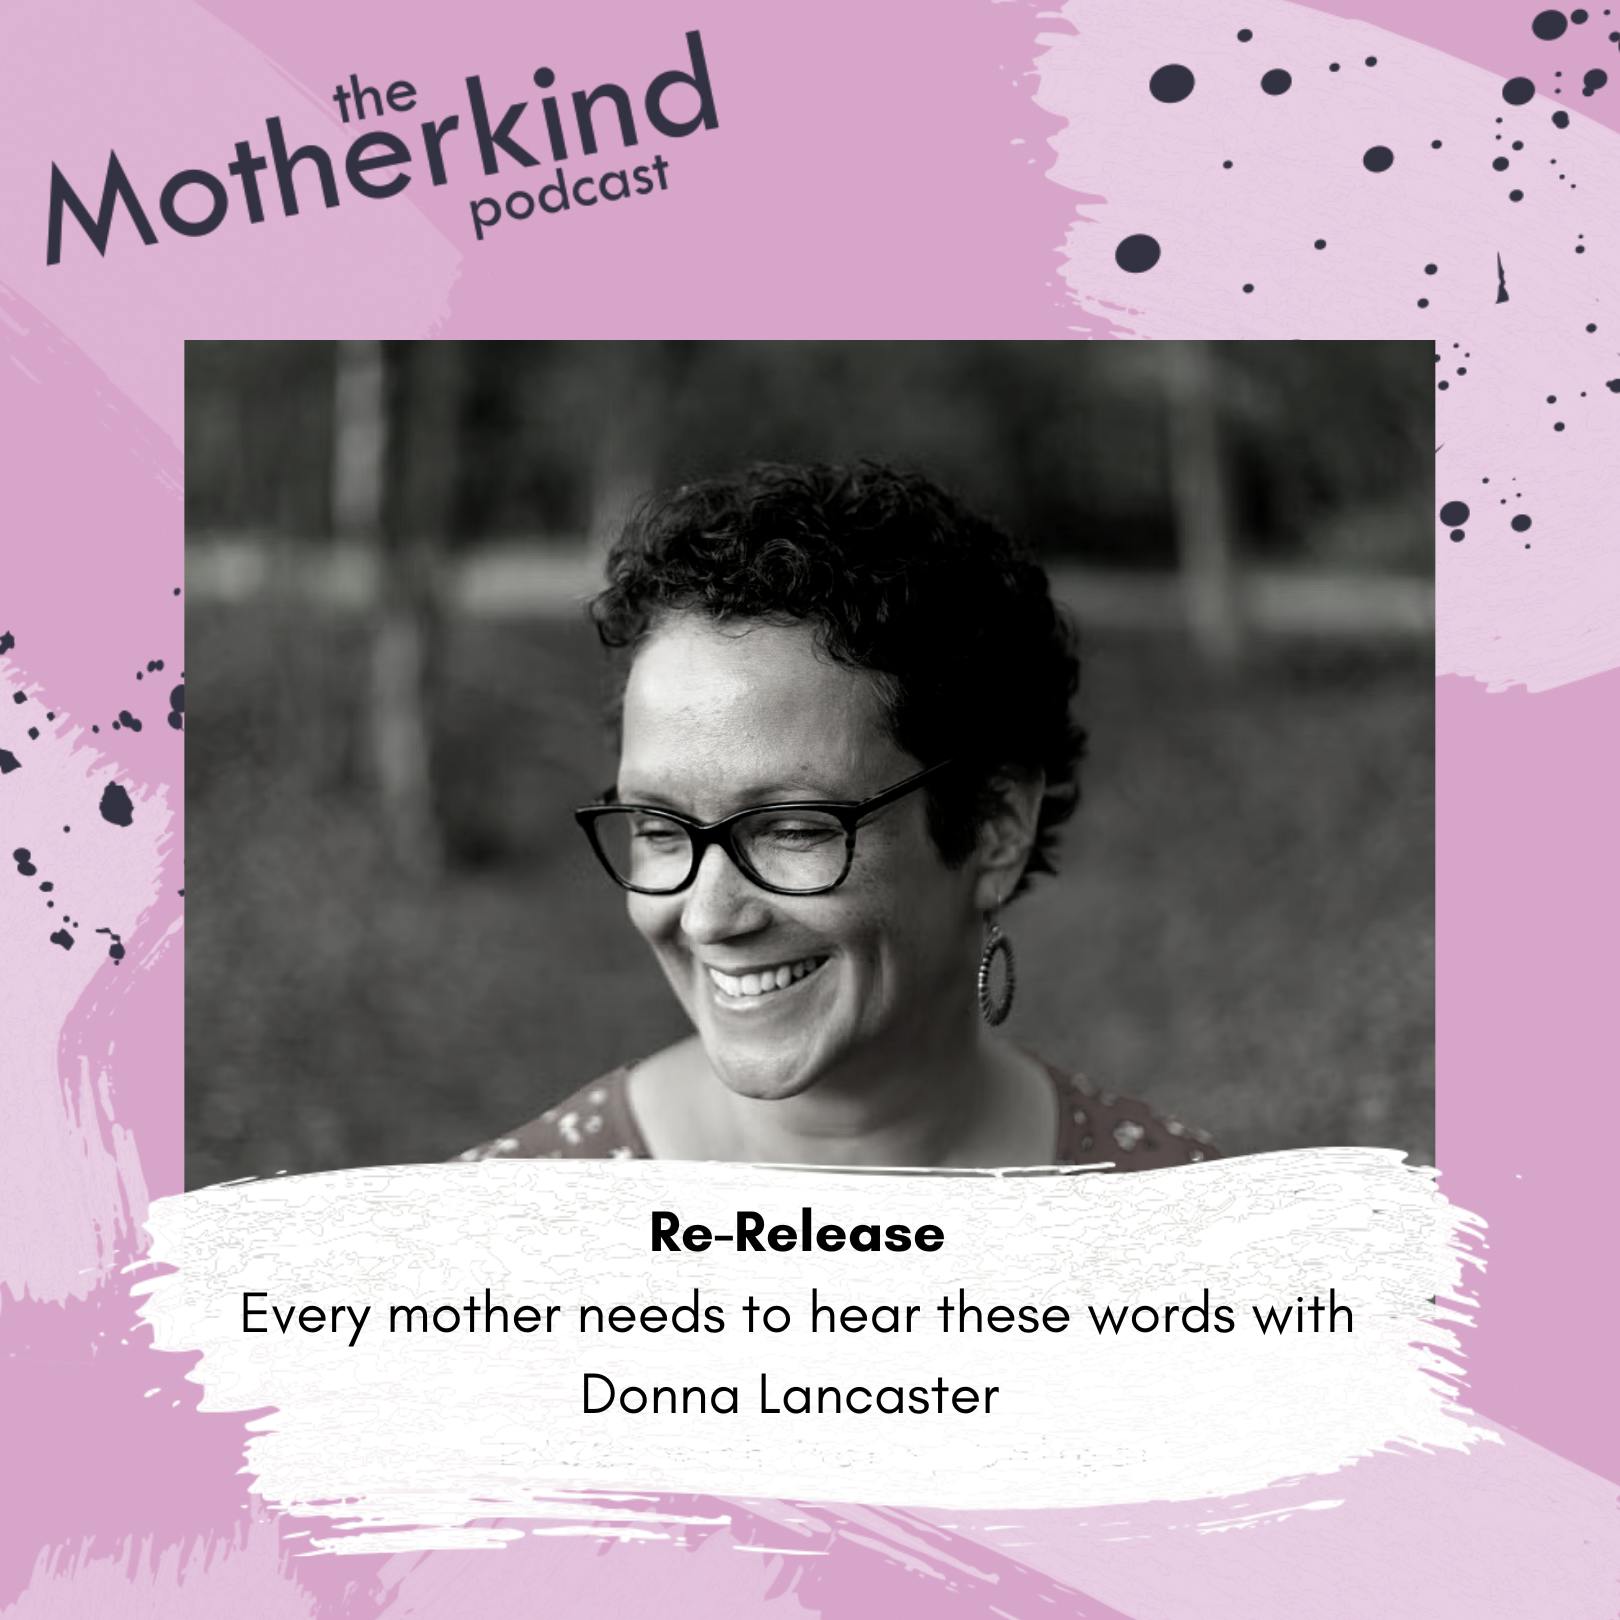 Re-Release | Every mother needs to hear these words with Donna Lancaster